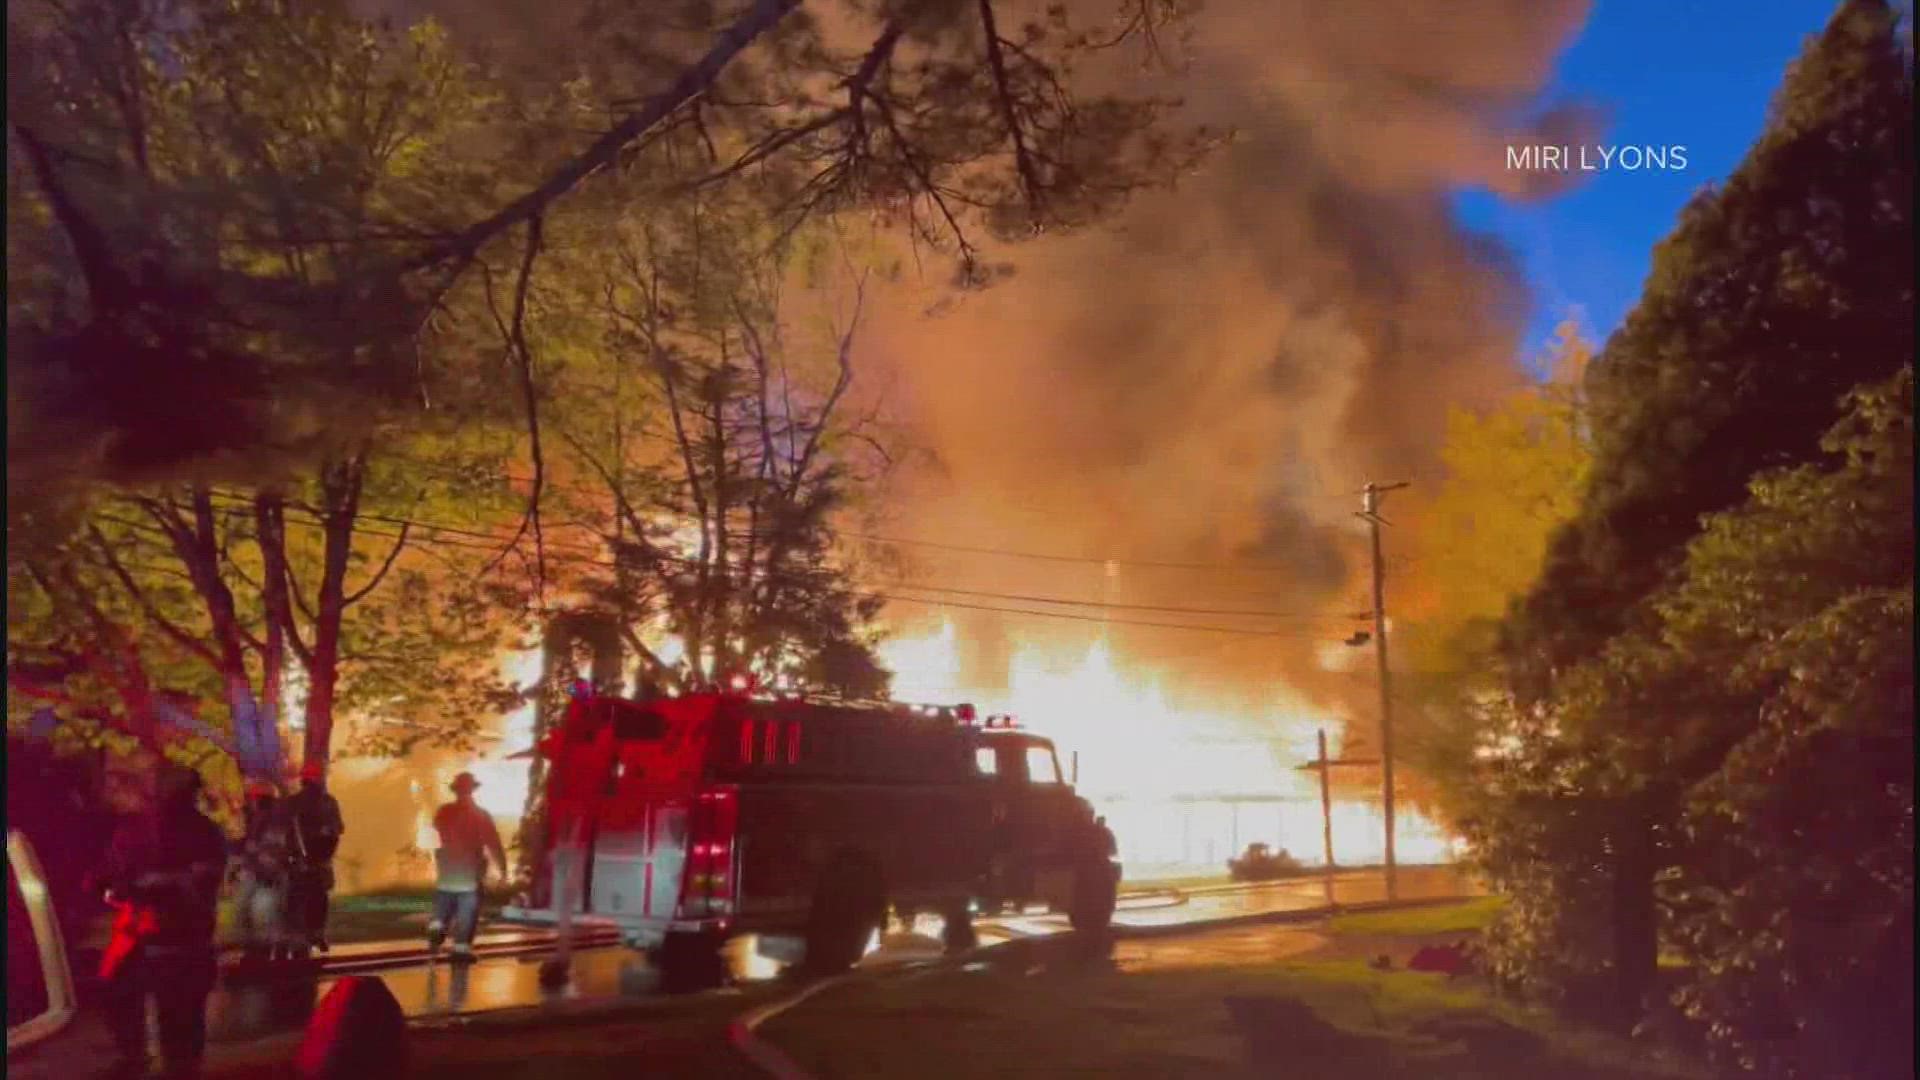 The fire started on Monday night, officials say.